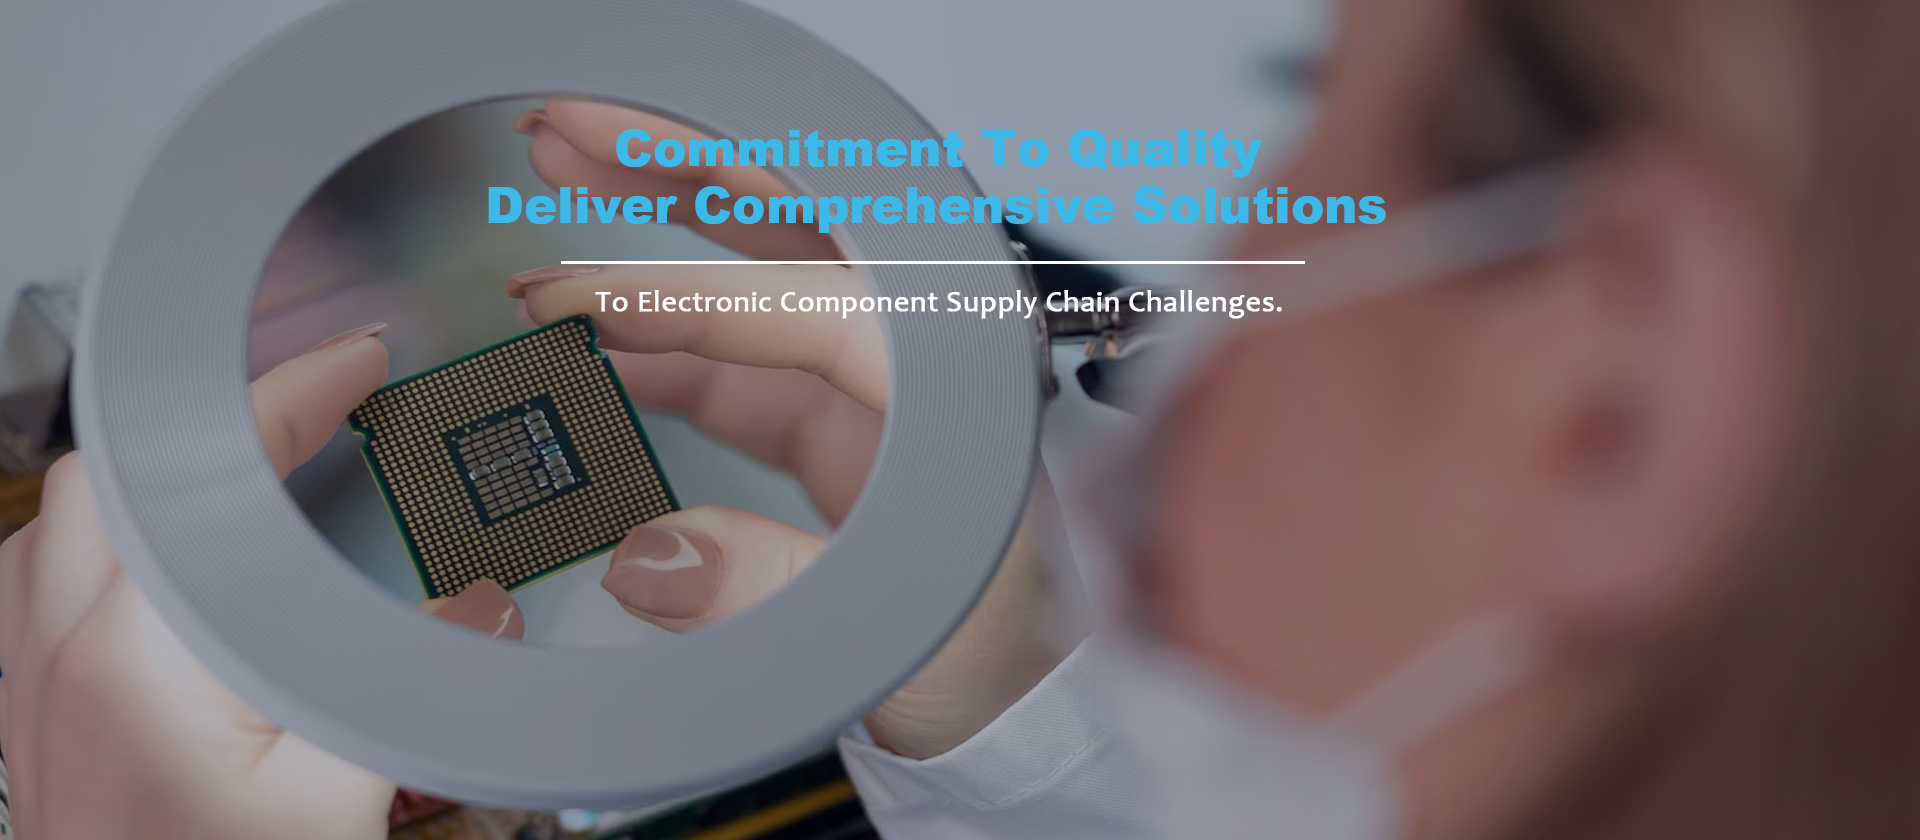 Quality Control of Electronic Components